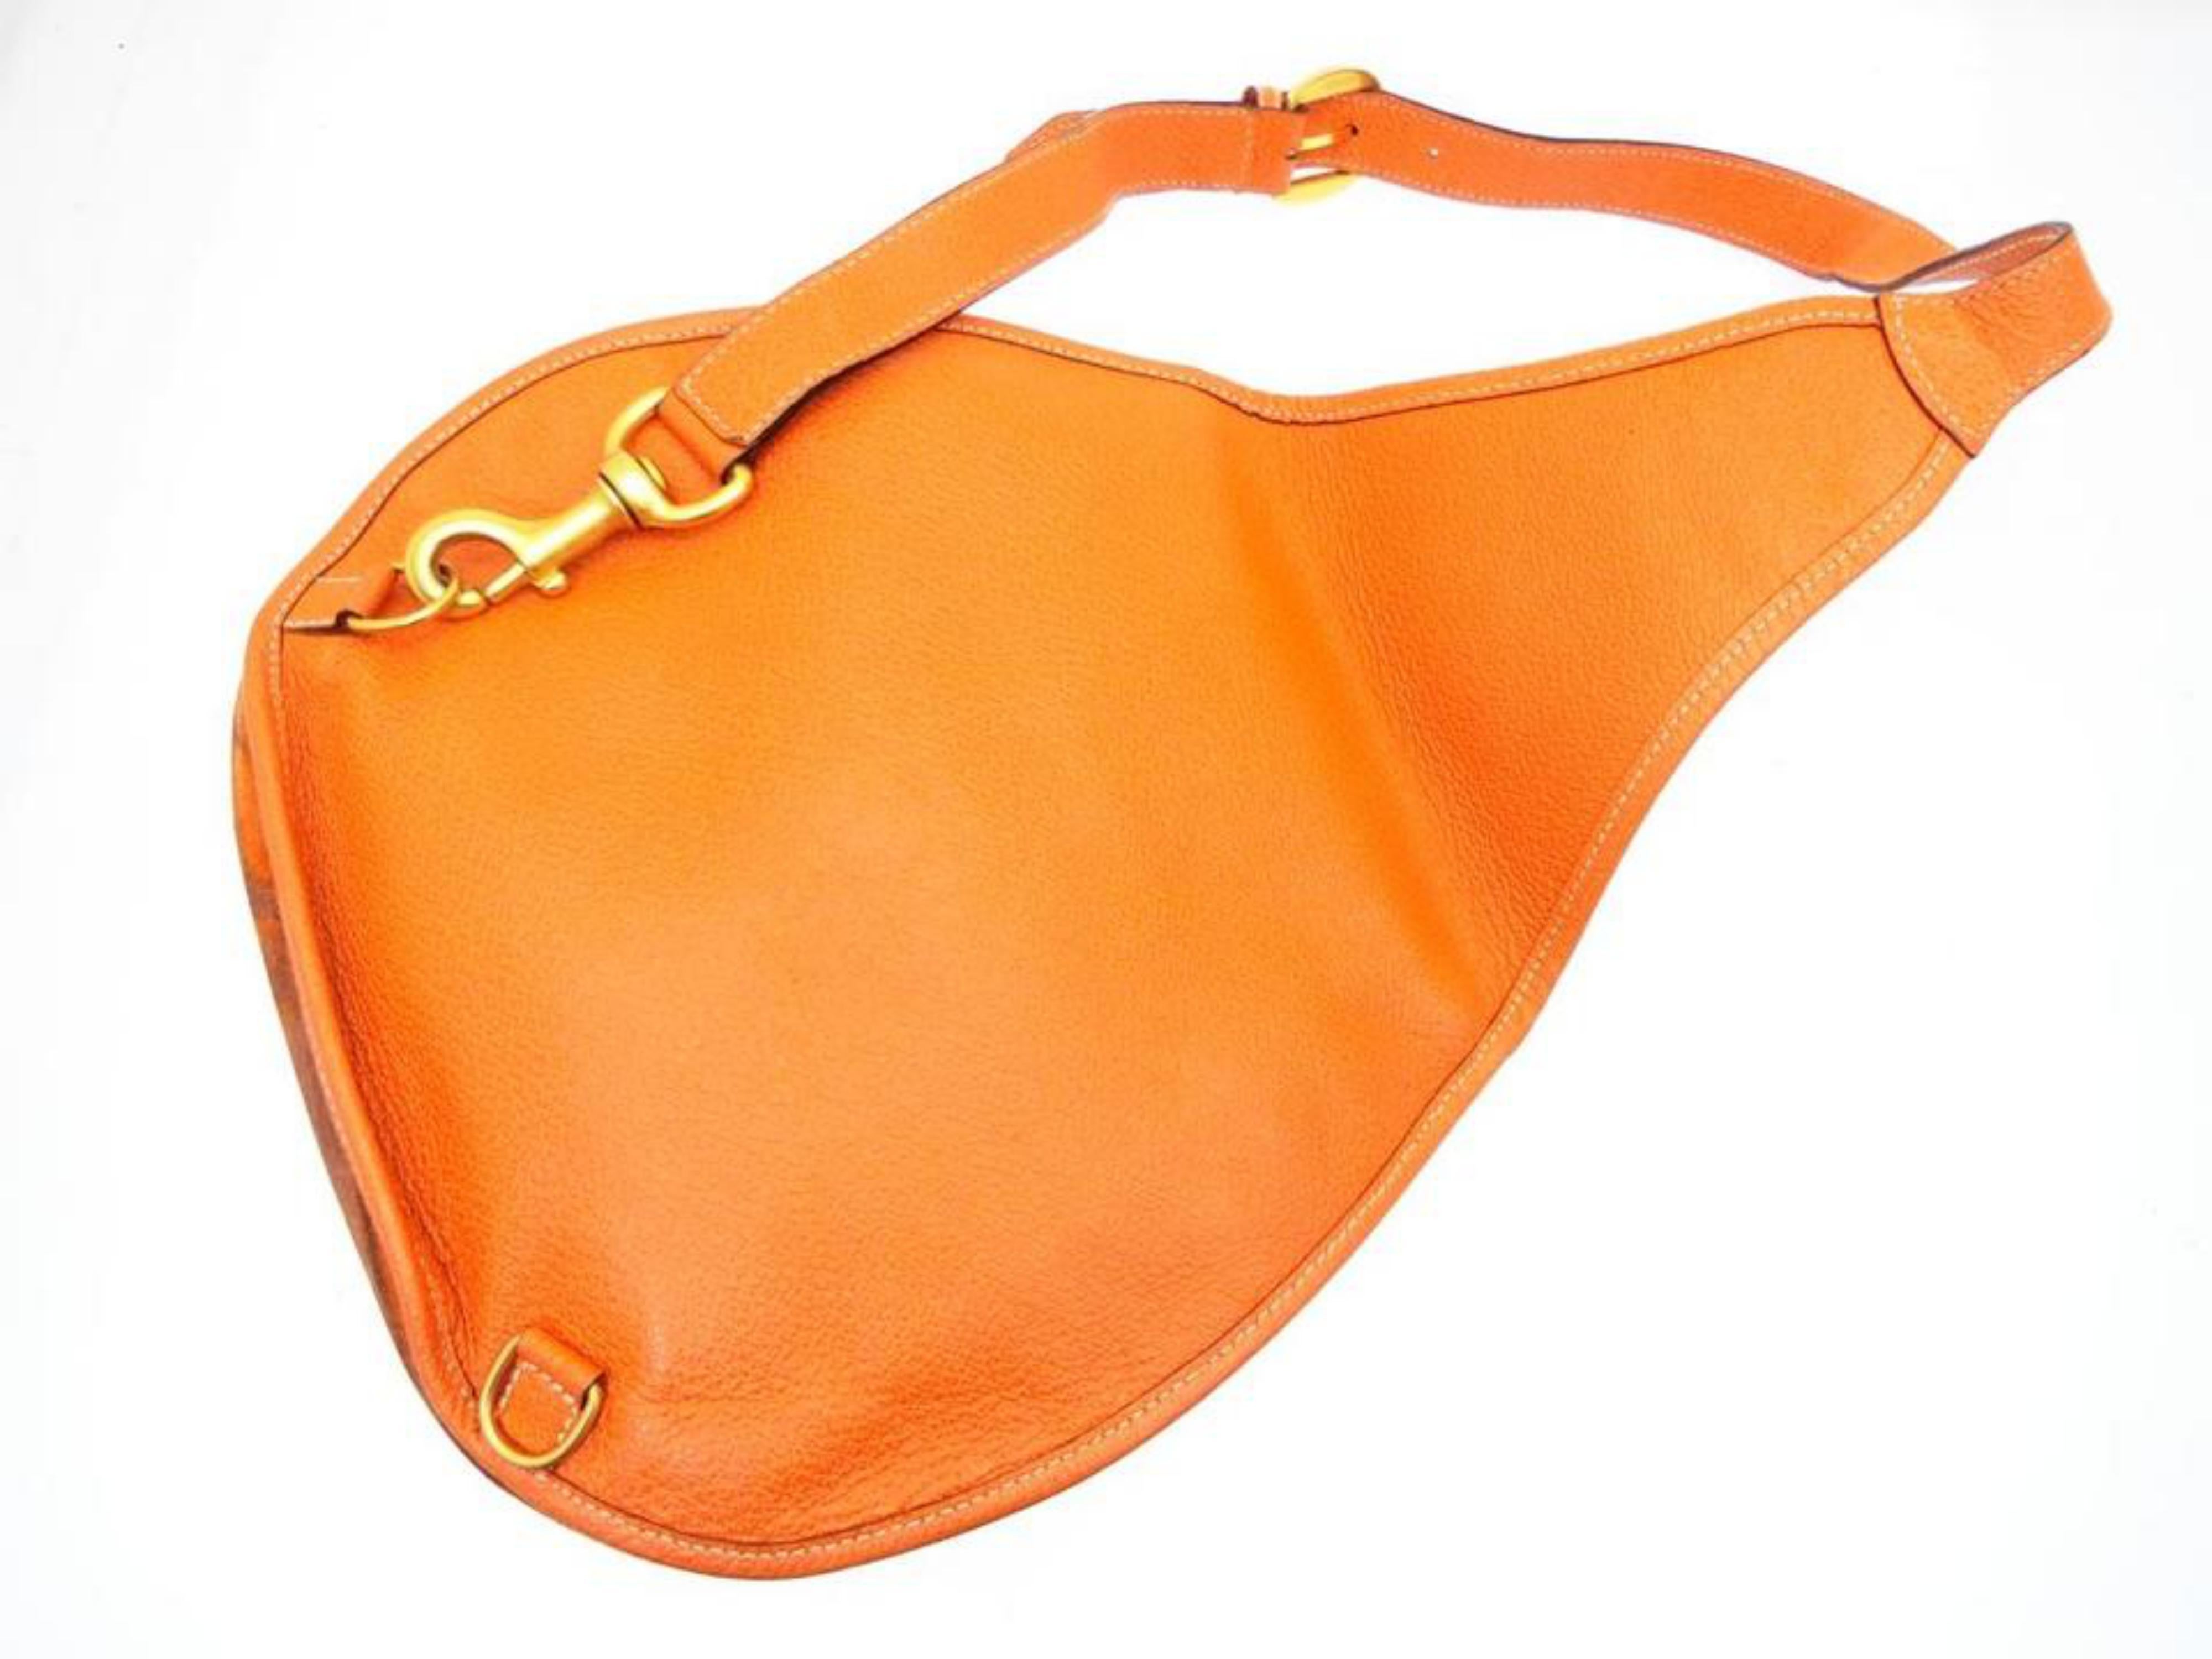 Gucci Horsebit Burnt Body 228677 Orange Suede Leather Shoulder Bag In Fair Condition For Sale In Forest Hills, NY